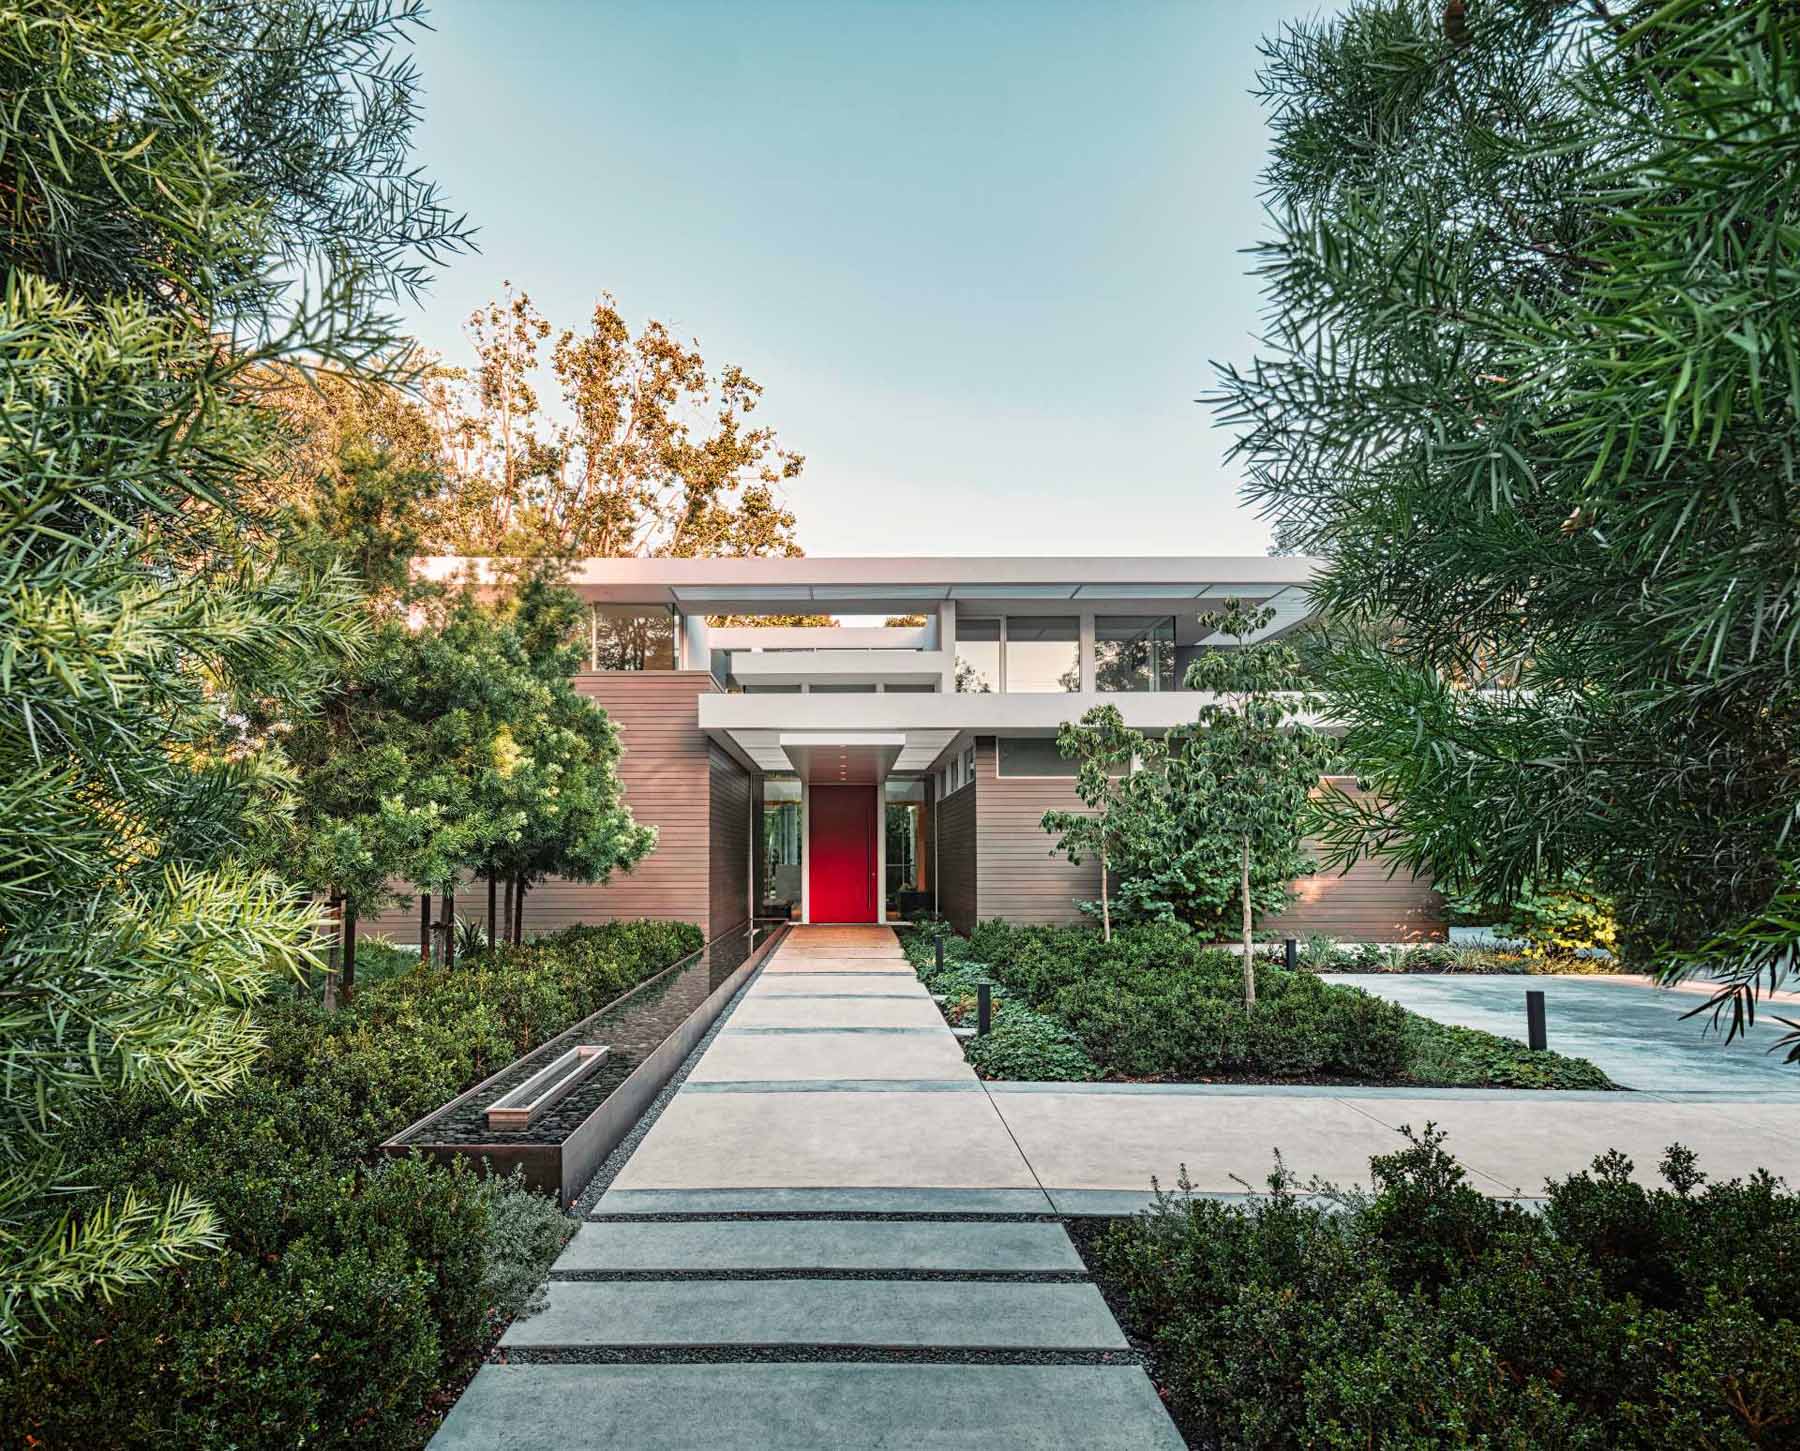 At the front of this modern home, a path guides visitors through the garden and to the pivoting red front door and entryway.